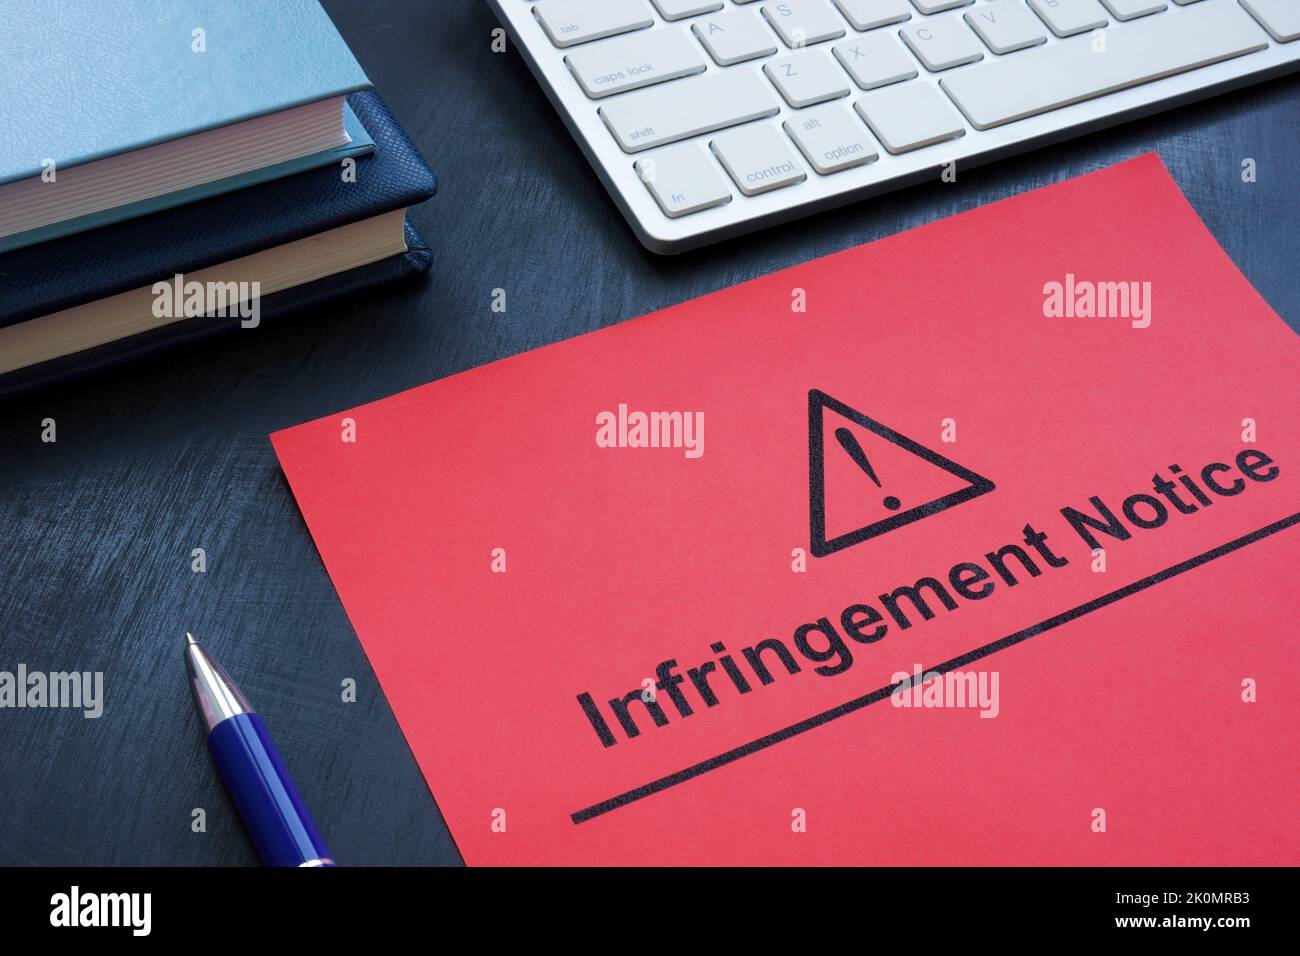 Infringement notice near a keyboard and notepads. Stock Photo